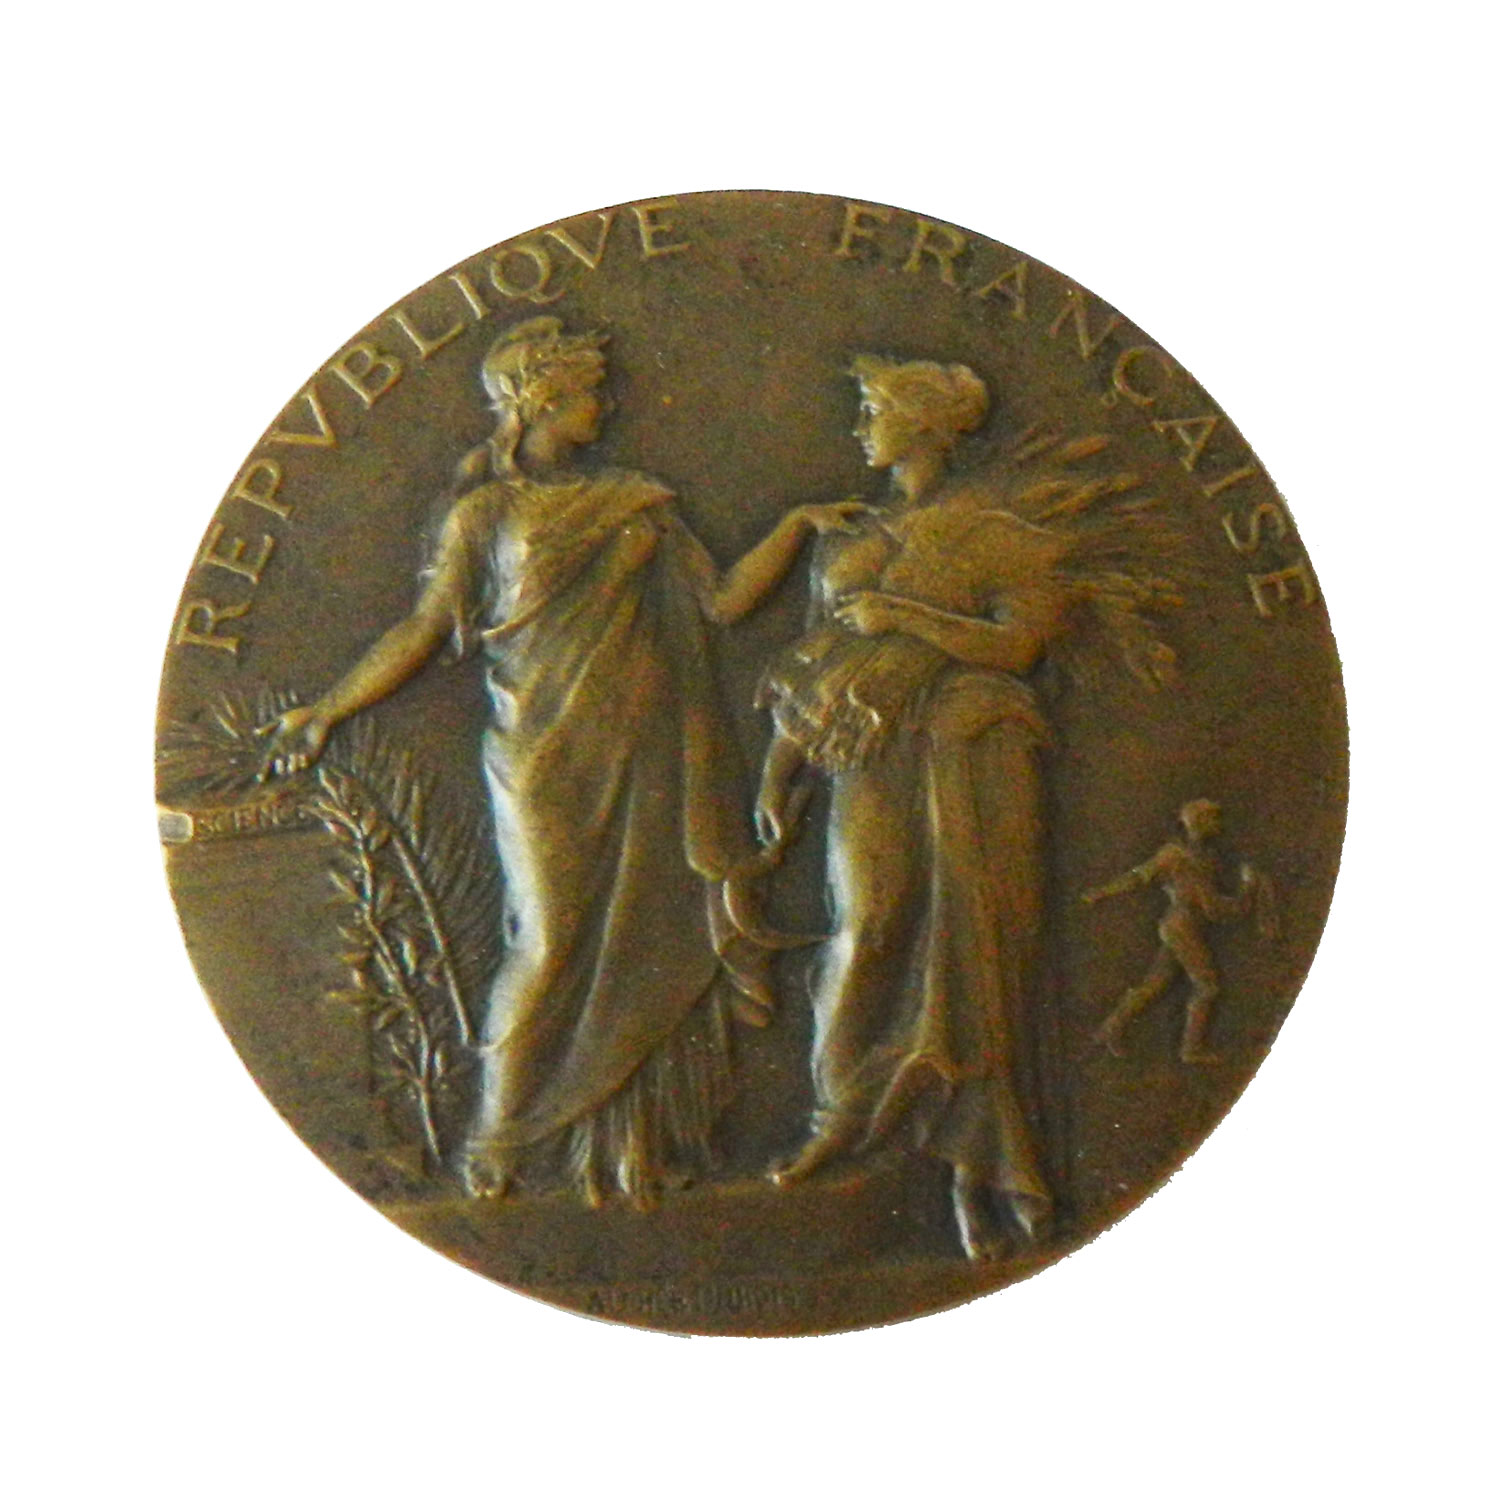 Antique wine growers medal